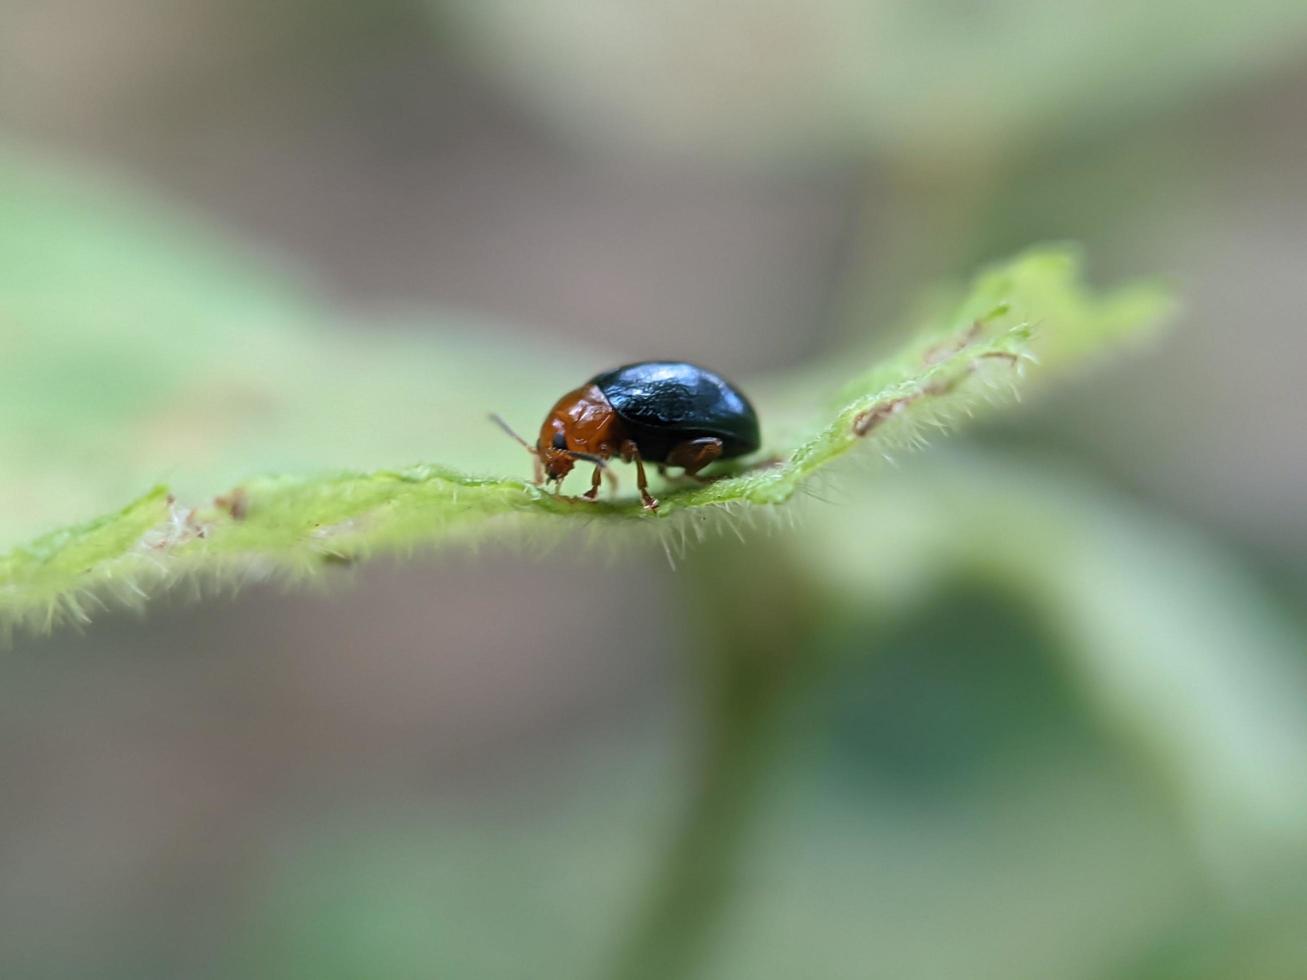 Aphthona is a genus of beetles, in the leaf beetle family Chrysomelidae, native to Europe and Asia photo